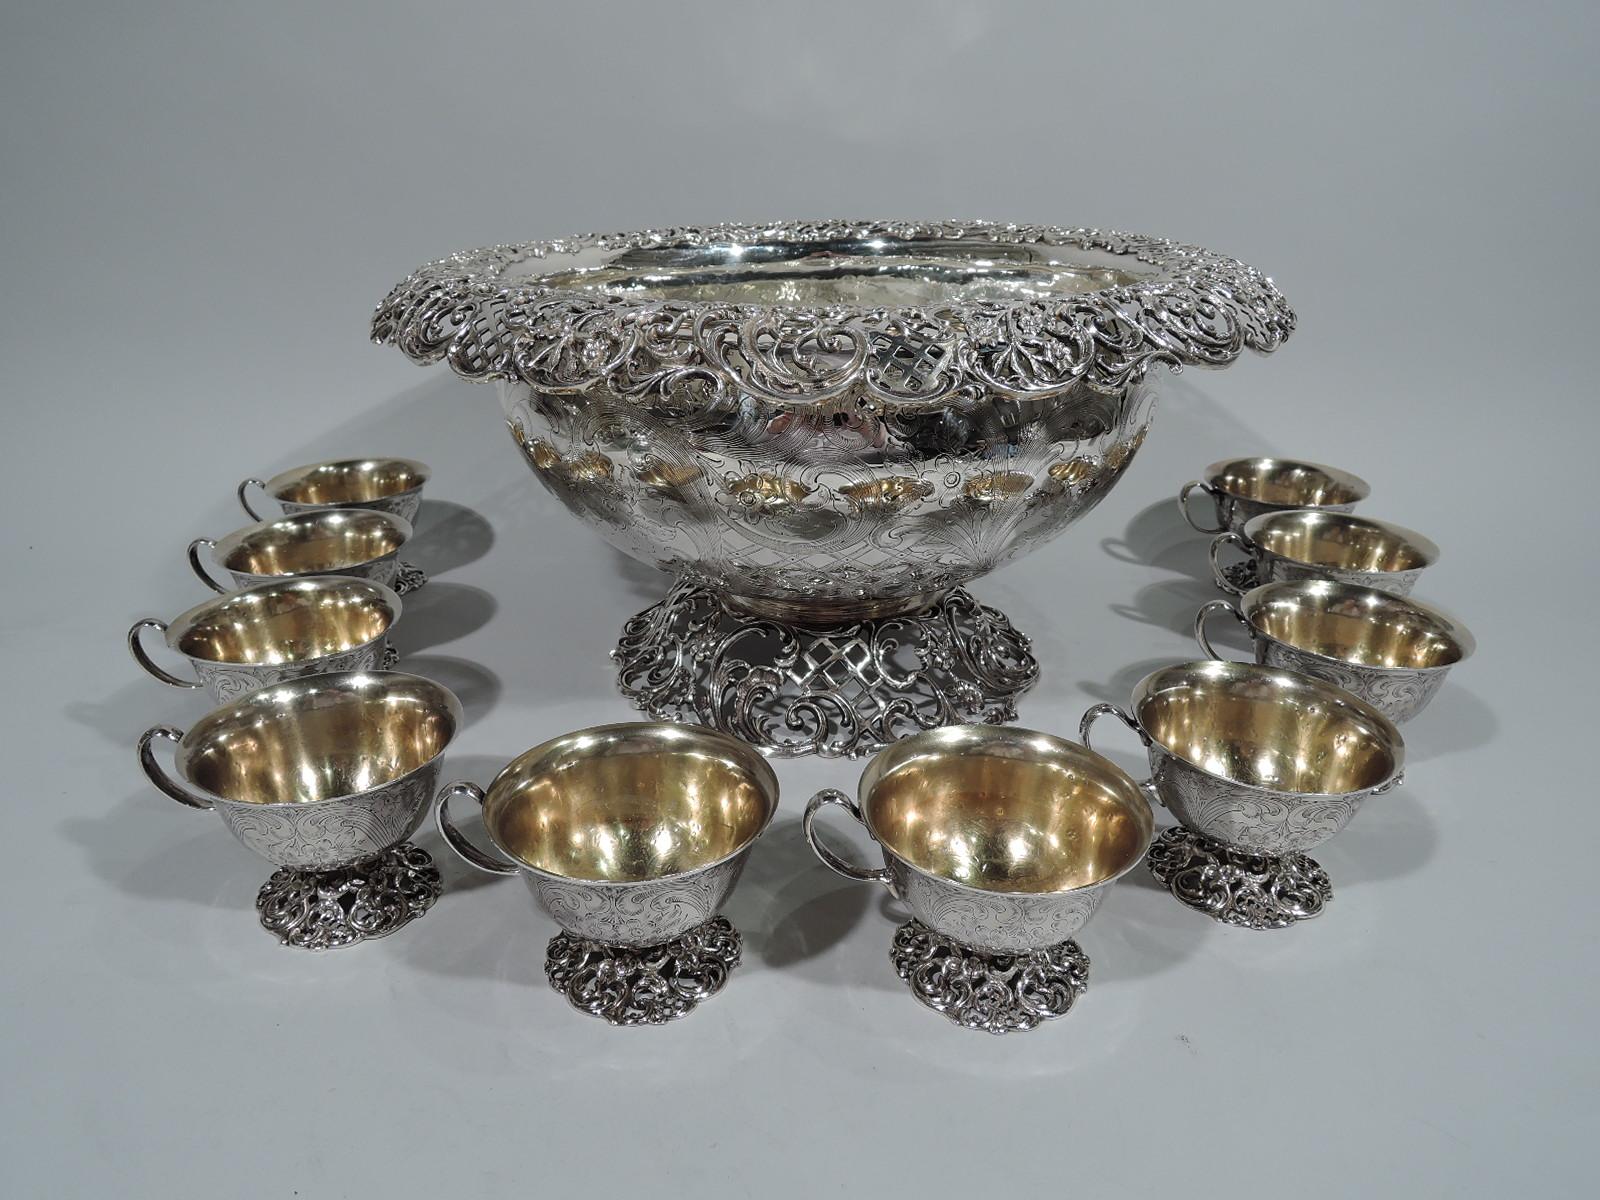 Main line magnificent sterling silver punch bowl and 10 cups. Made by JE Caldwell in Philadelphia, circa 1890.

Bowl: Curved sides, rolled rim, and dome foot. Rim and foot open with flowers, foliage, scrolls, and diaper. Exterior engraved with same.